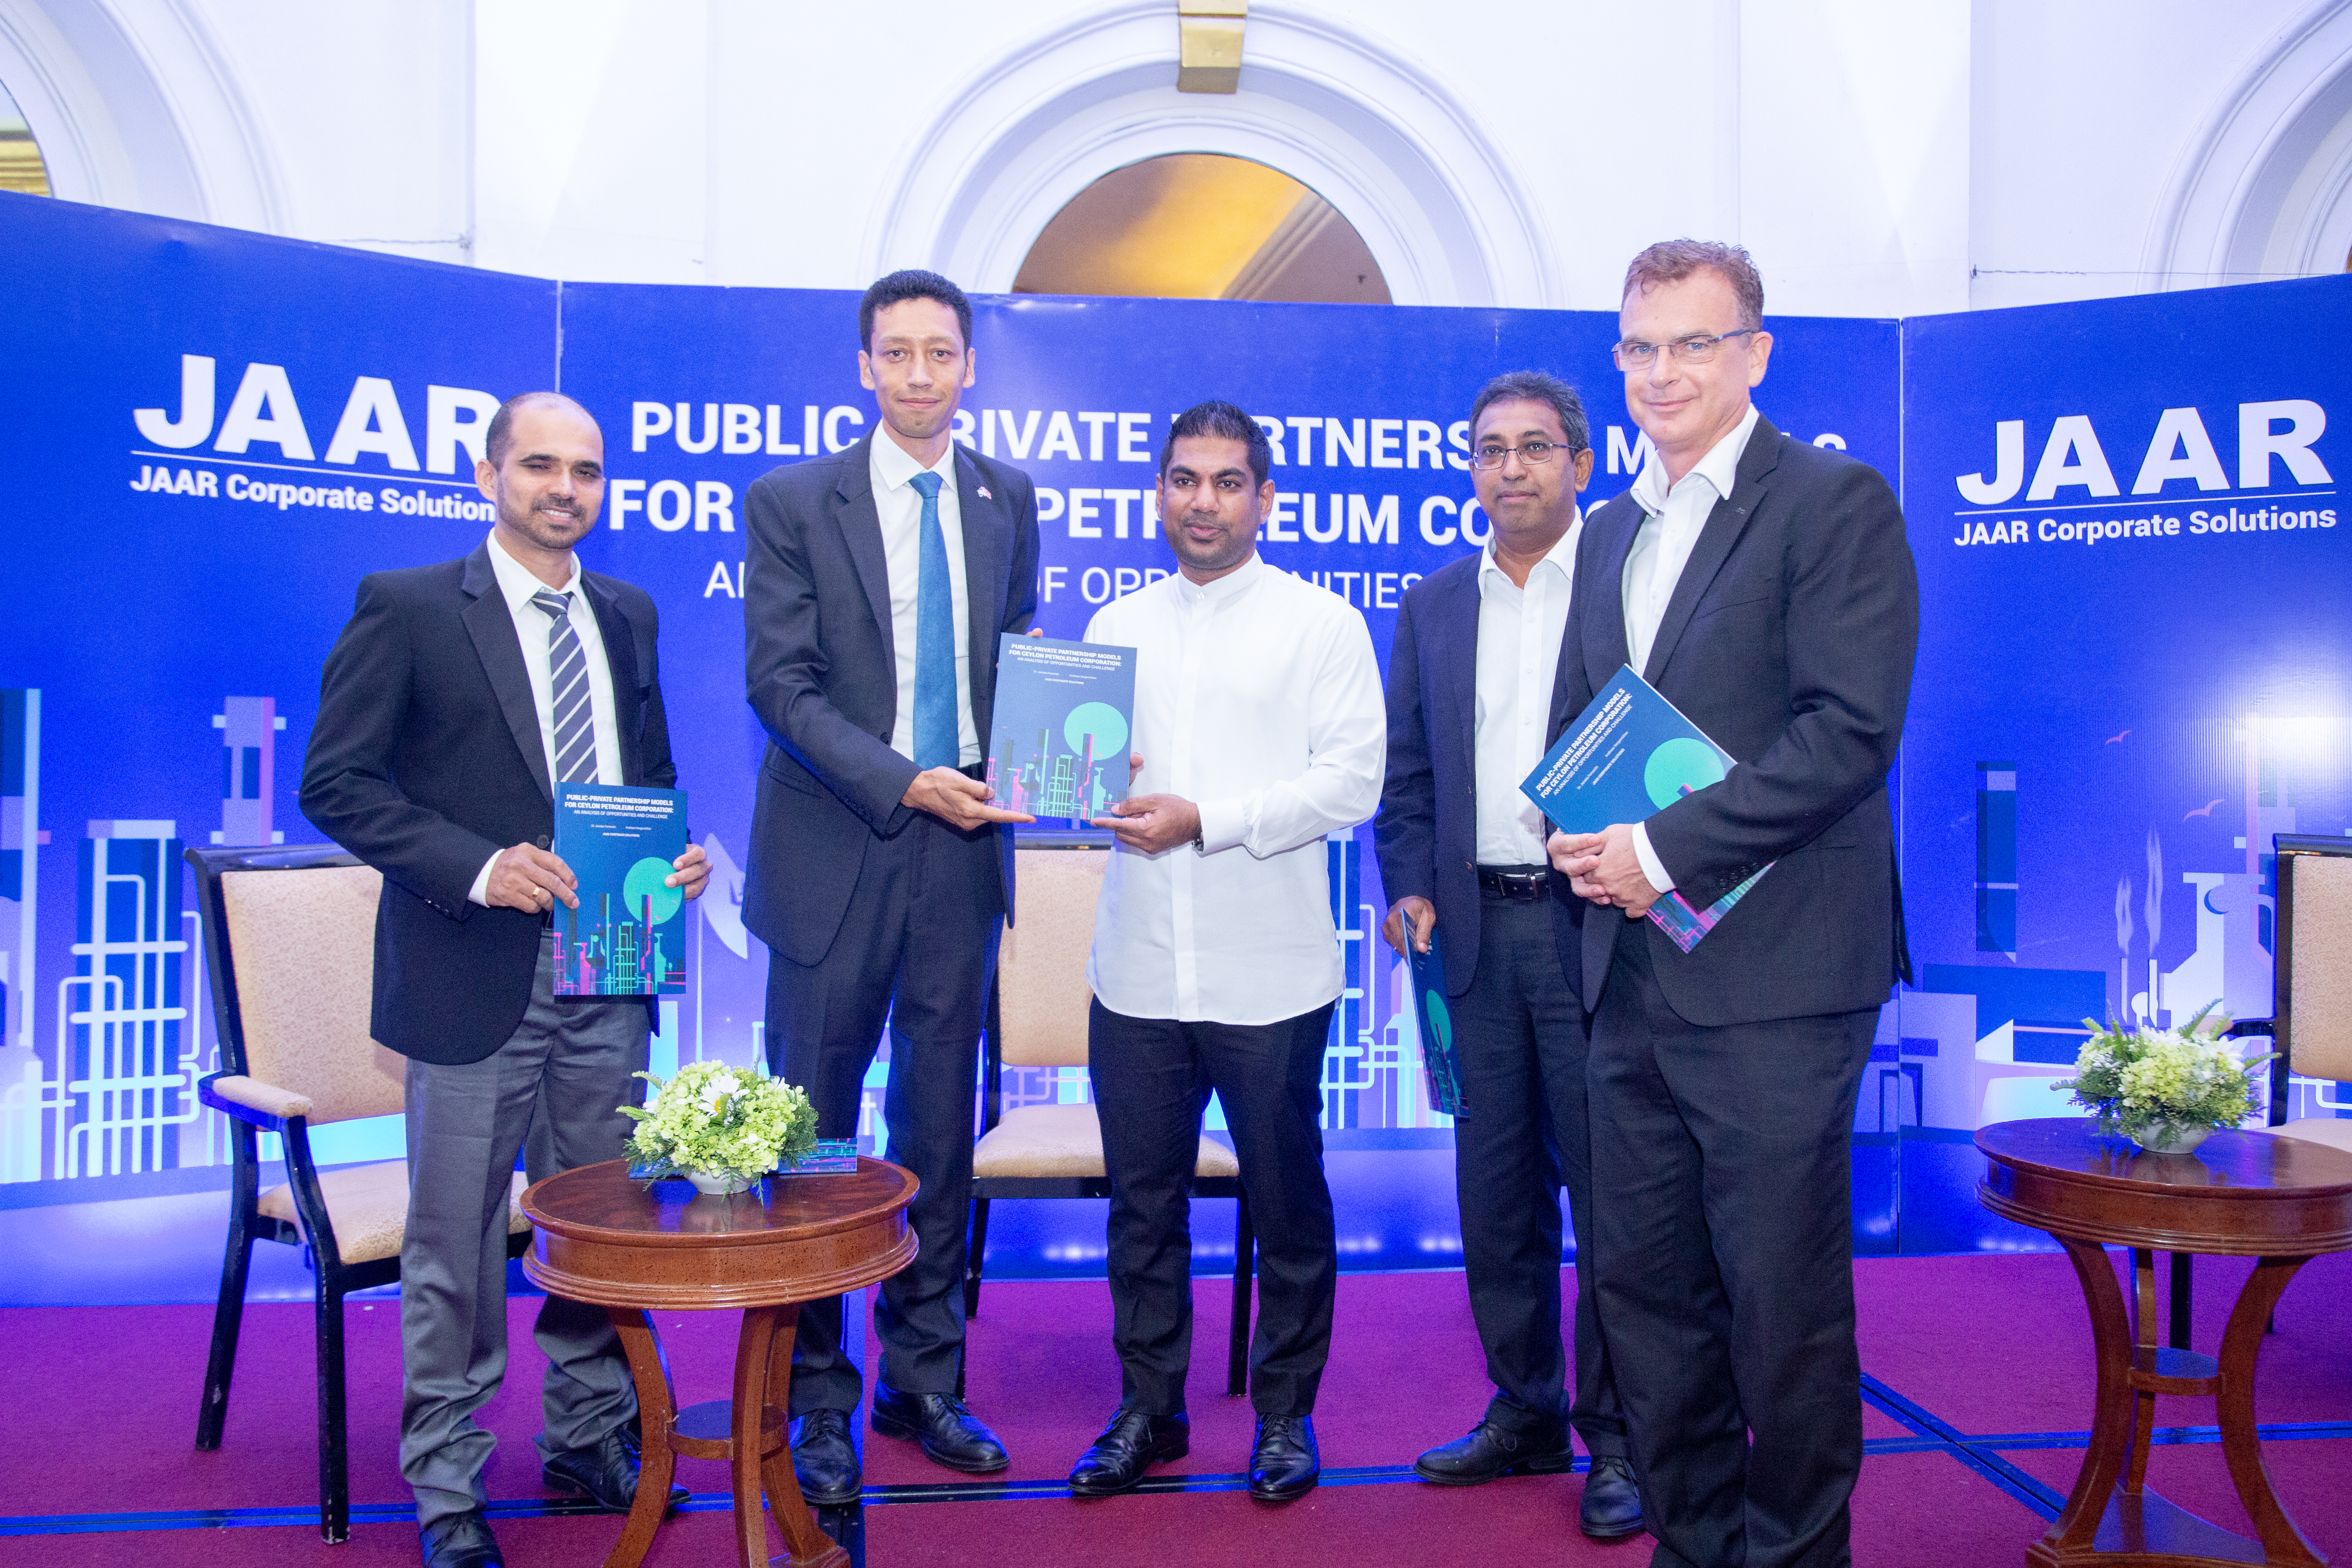 This image represents the handing over of Report launch to the Panelists